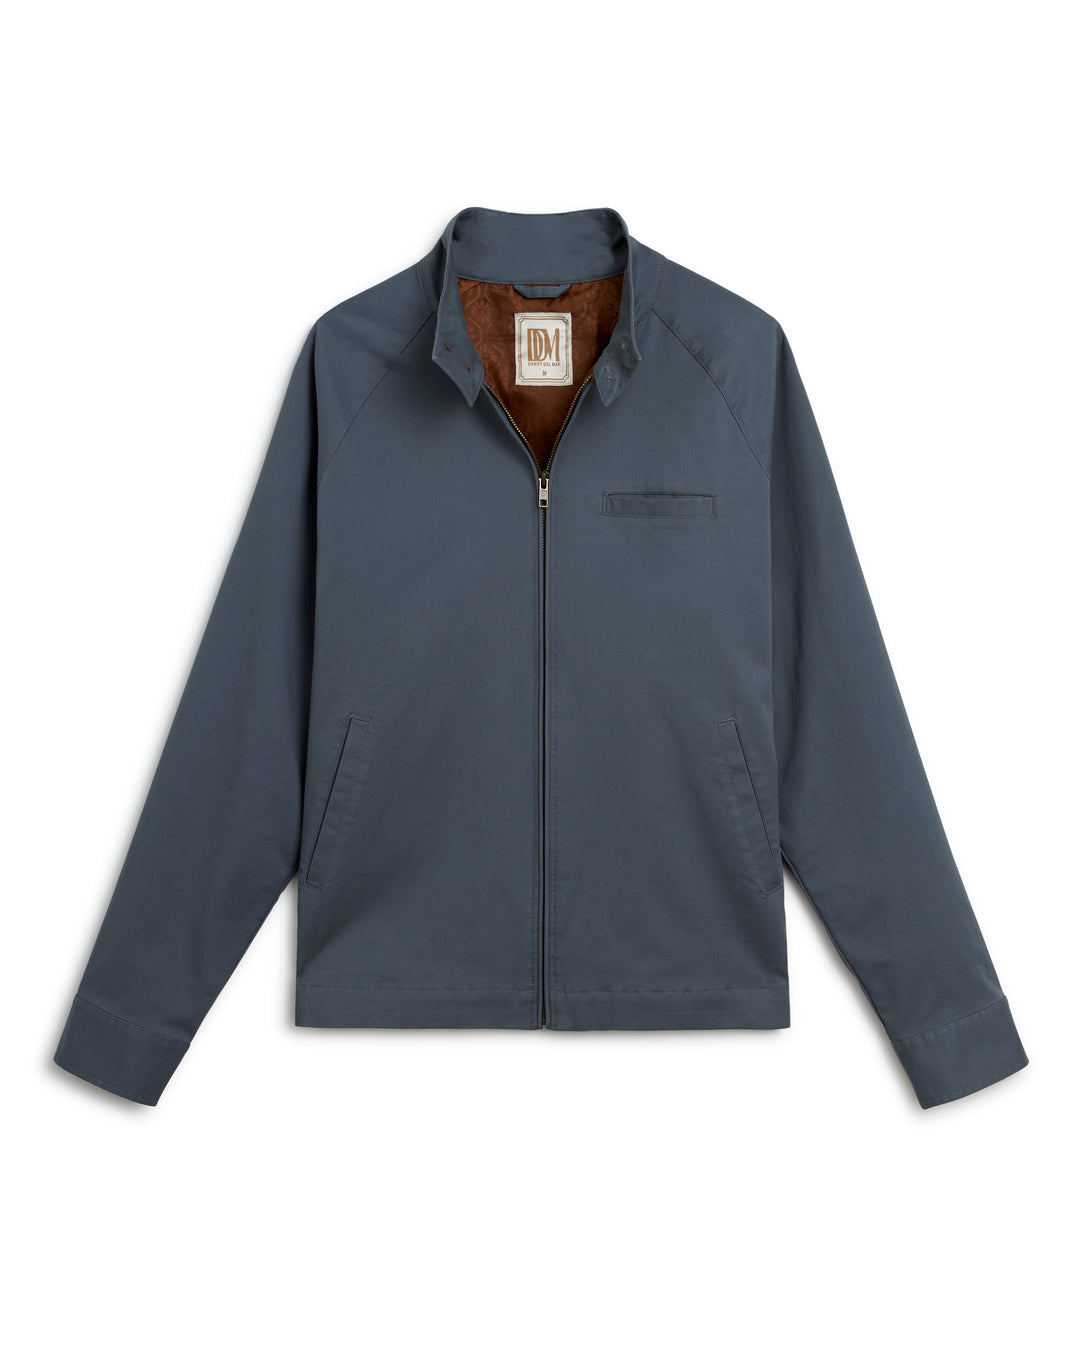 The Abyss Rhodes Jacket by Dandy Del Mar, a men's blue jacket with a brown lining, is made of washed cotton twill fabric, offering a lightweight shell.